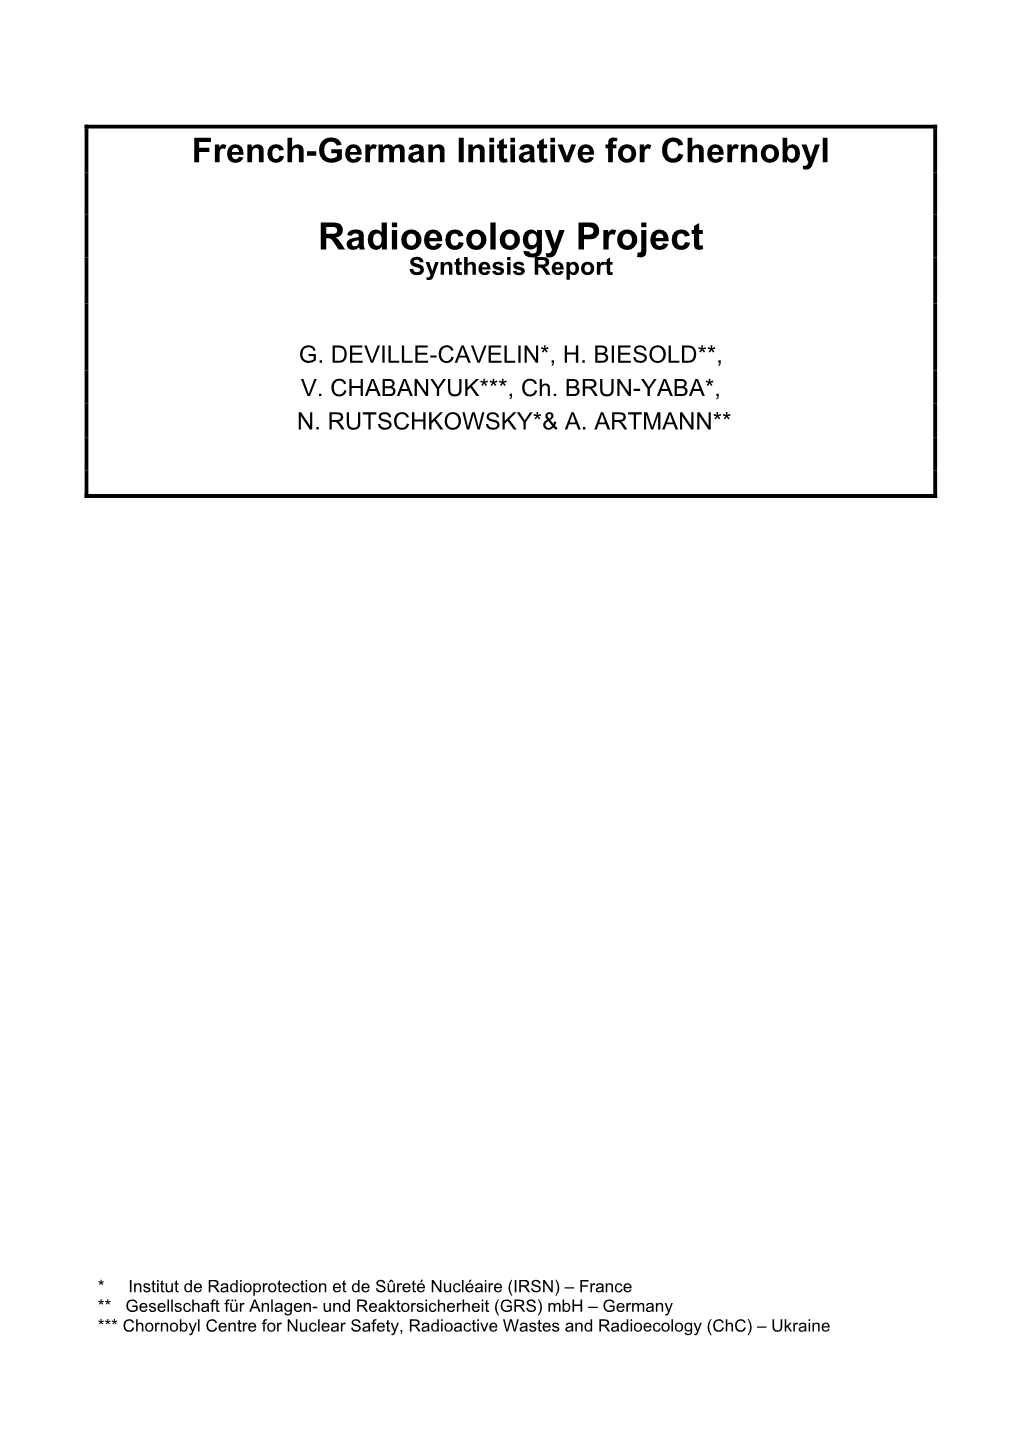 Radioecology Project Synthesis Report